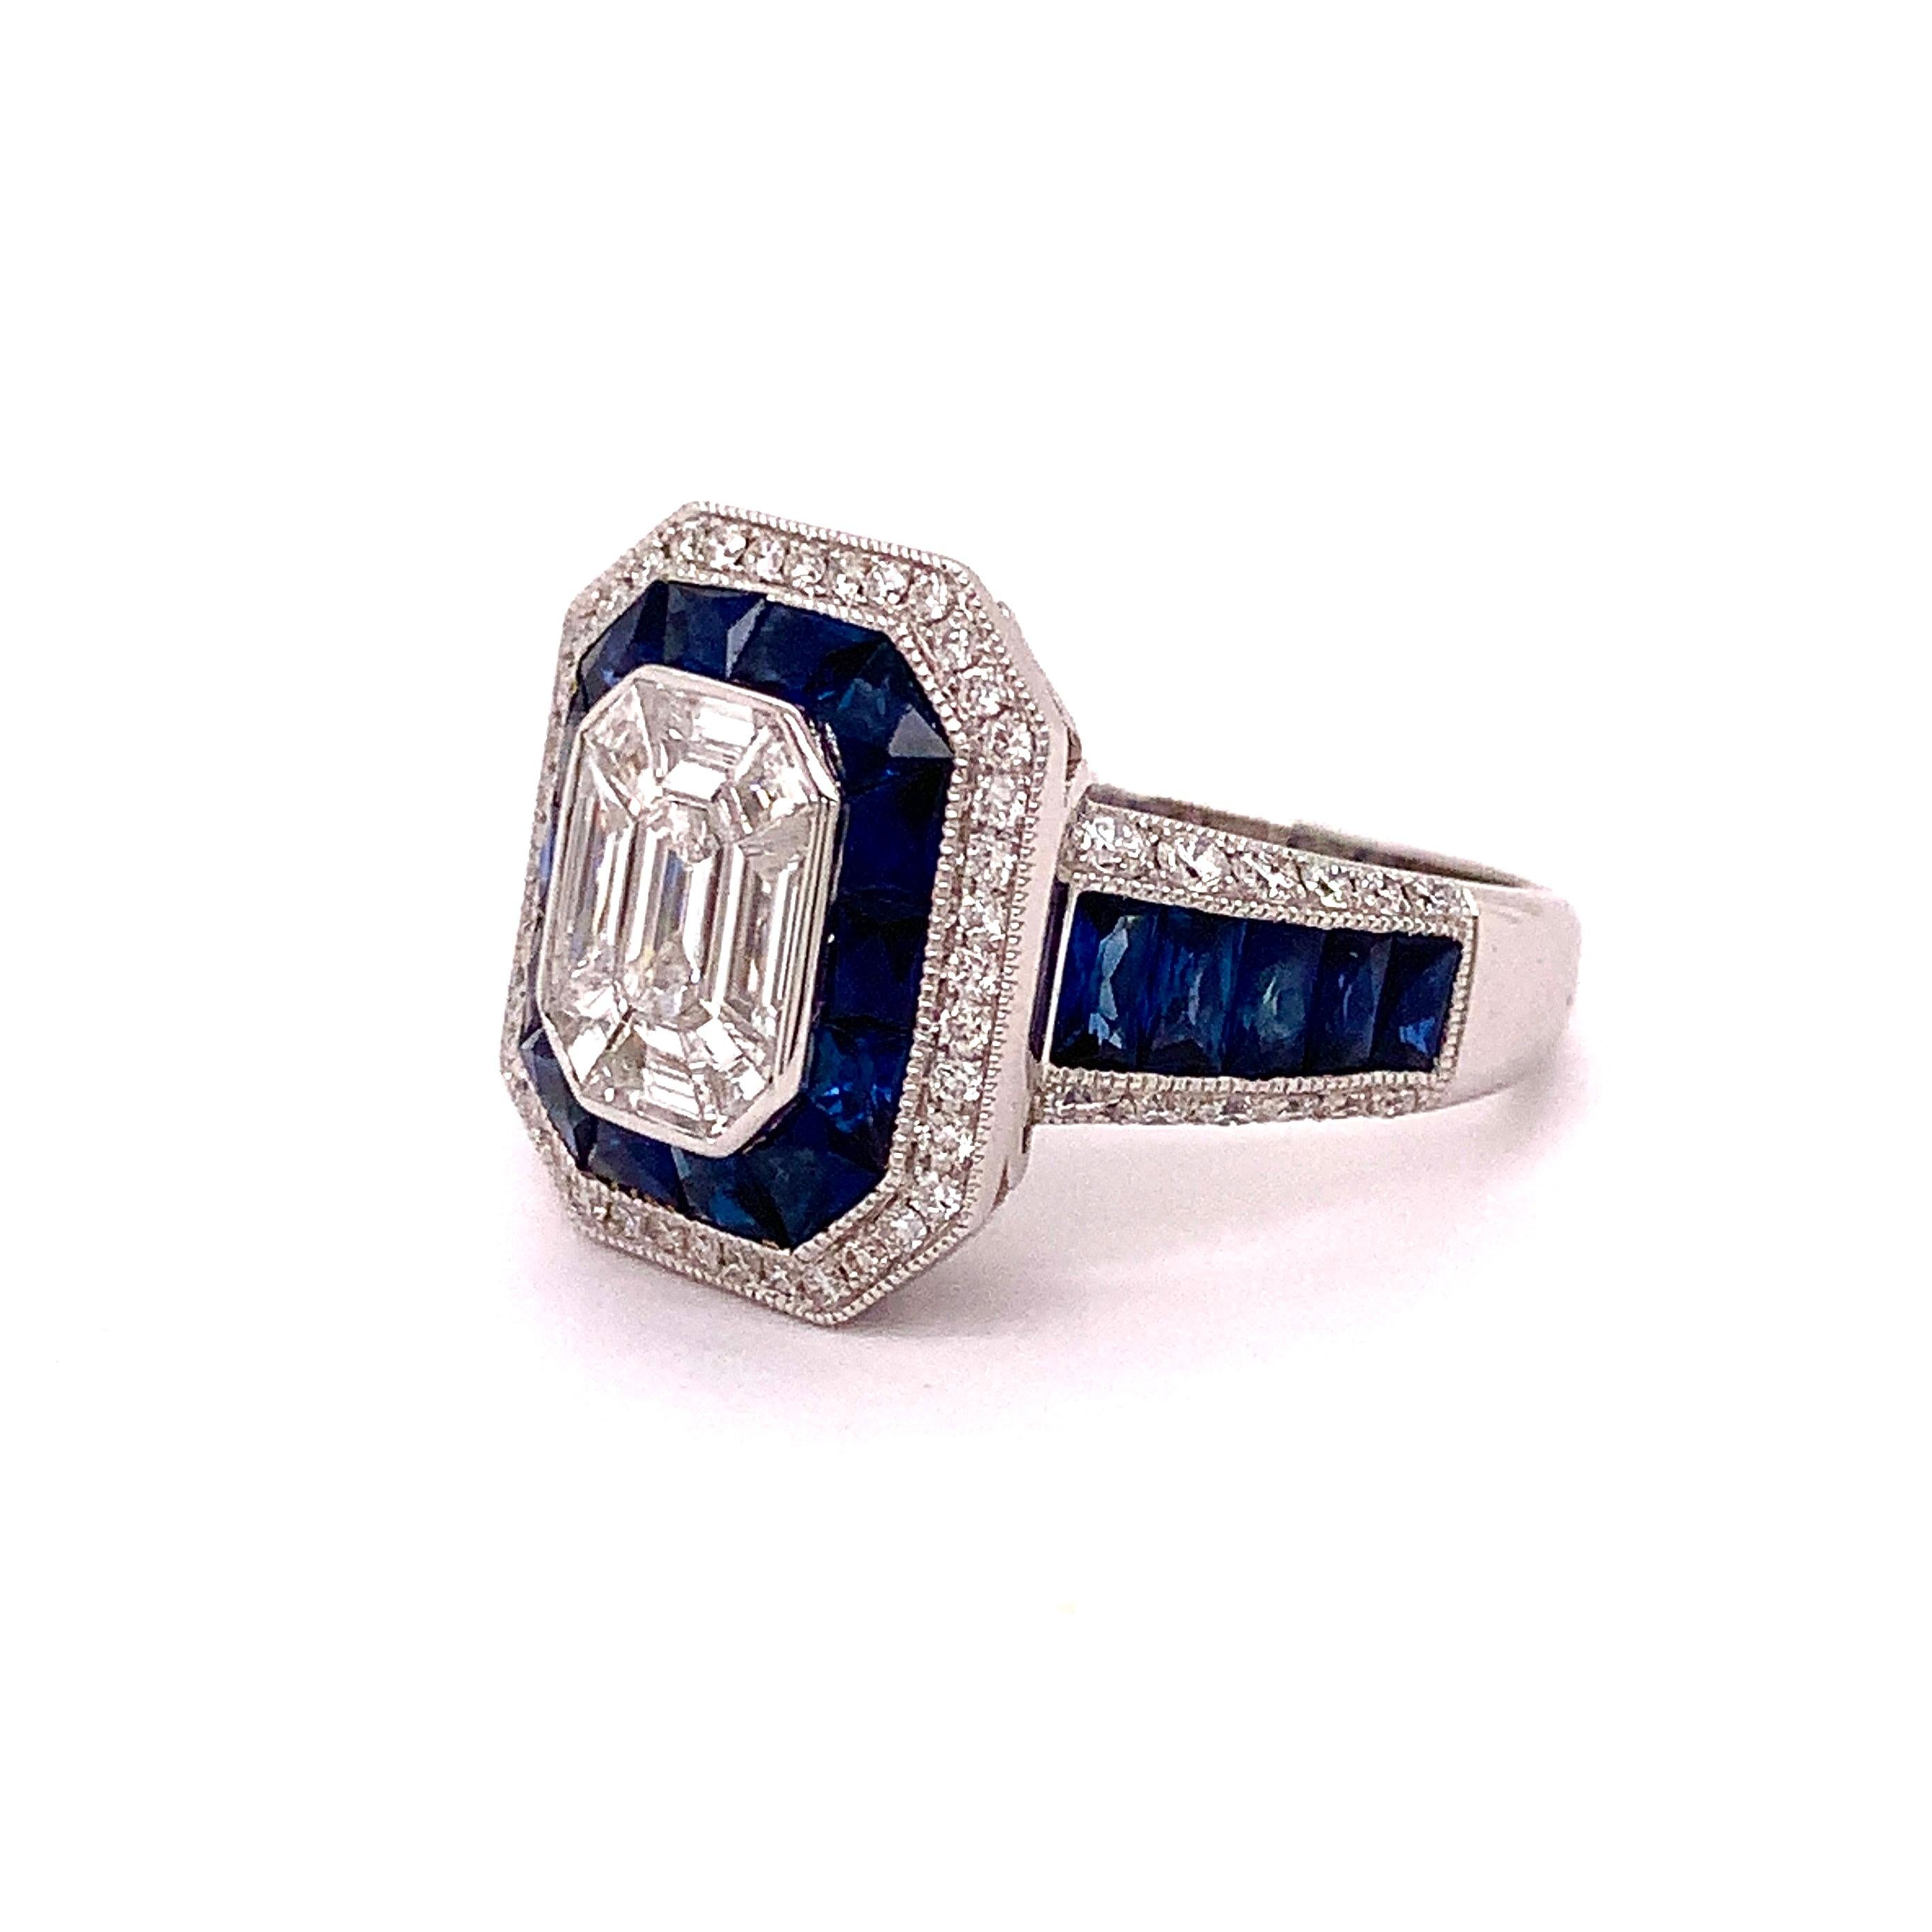 Sophisticated ring with 1.30 carats in round brilliant and mixed cut diamonds.  24 vibrant blue French cut Ceylon sapphires, for a total of 2.10 ctw. in sapphires. Mounted in 6.16 grams of 18K white gold. Old world craftsmanship with todays